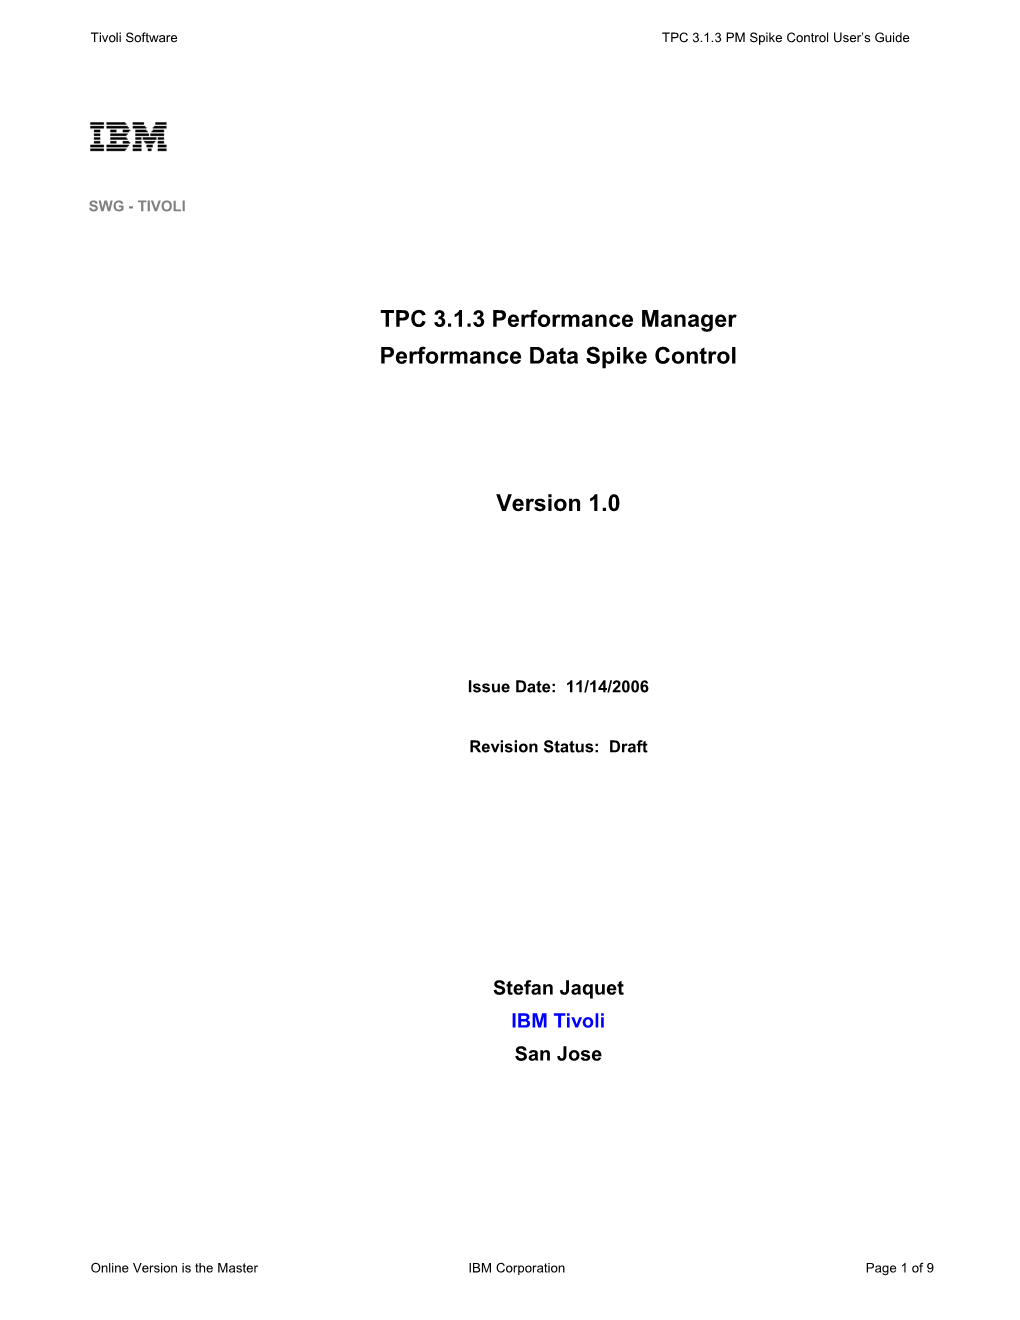 TPC 3.1 Performance Manager Clrspk Utility User's Guide